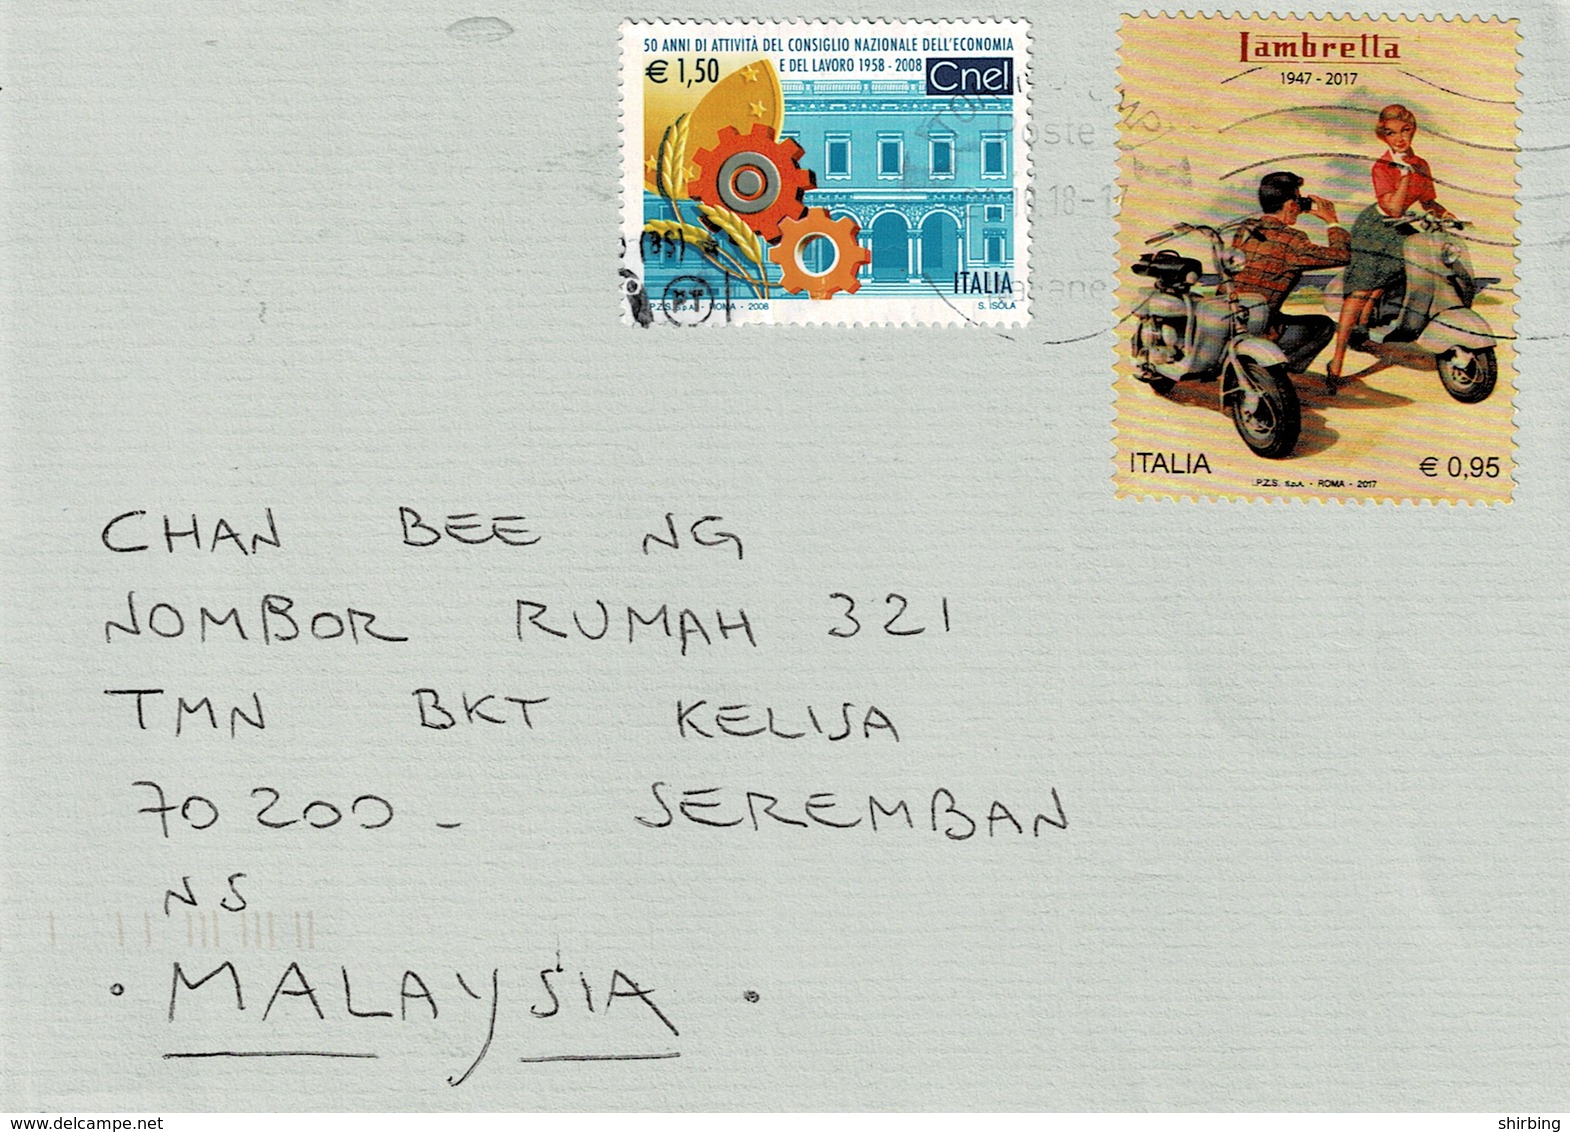 24M : Italy Boy & Girl, Scooter, Motobike, Bicycle, Camera, Gear Logo  Stamp Used On Cover - Interi Postali